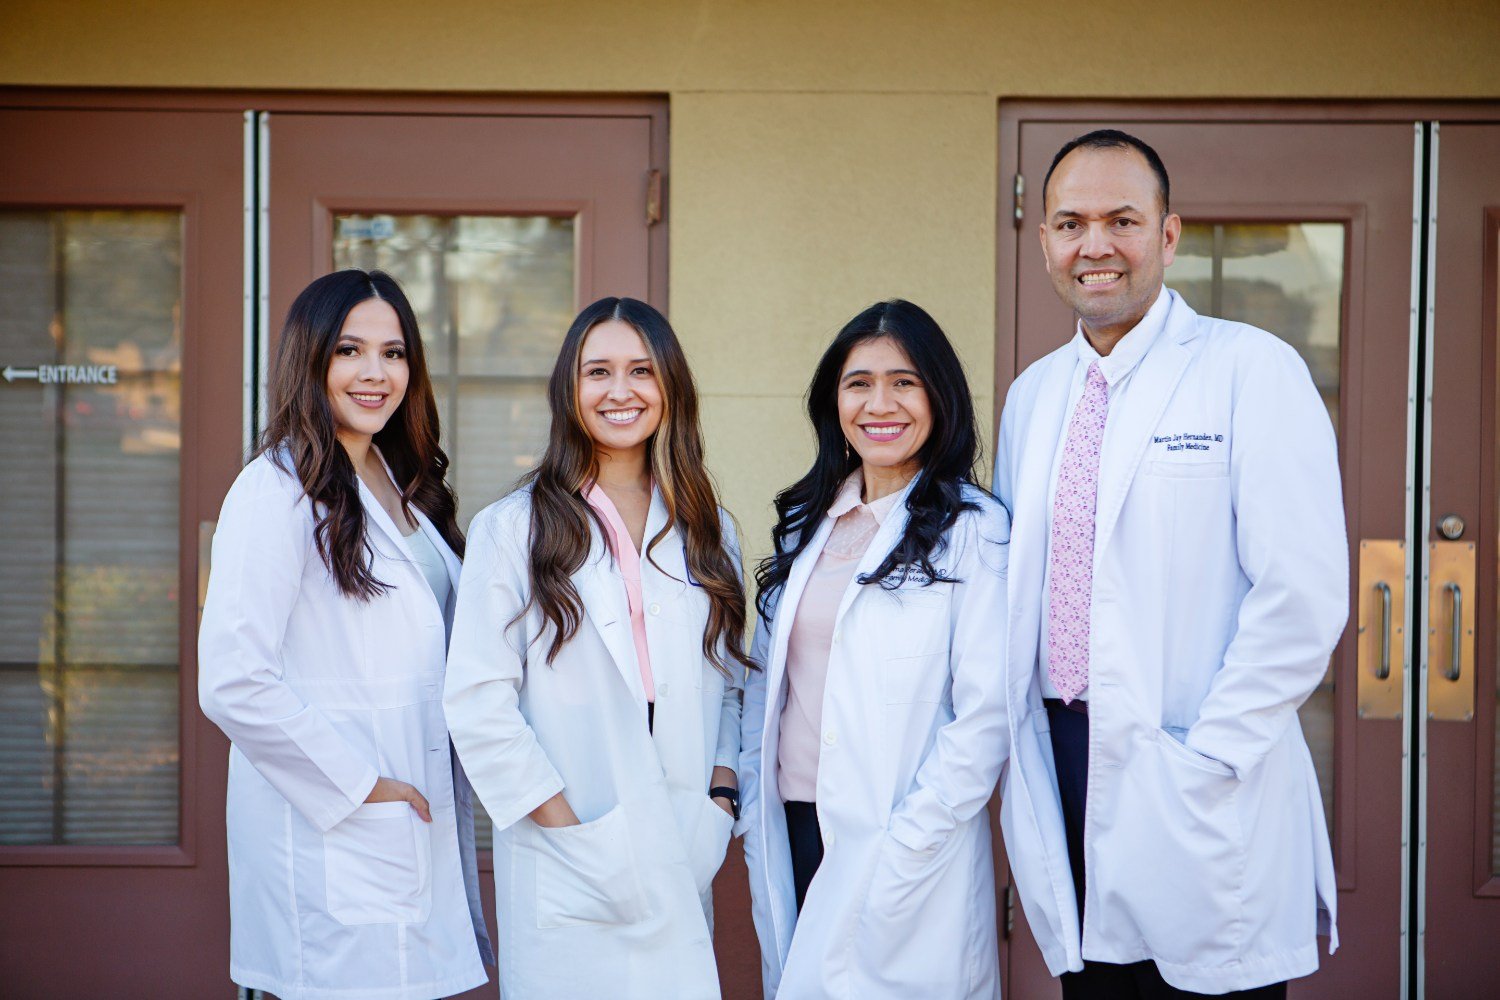 Live Well Family Medicine Primary Care Physicians in Chandler, AZ